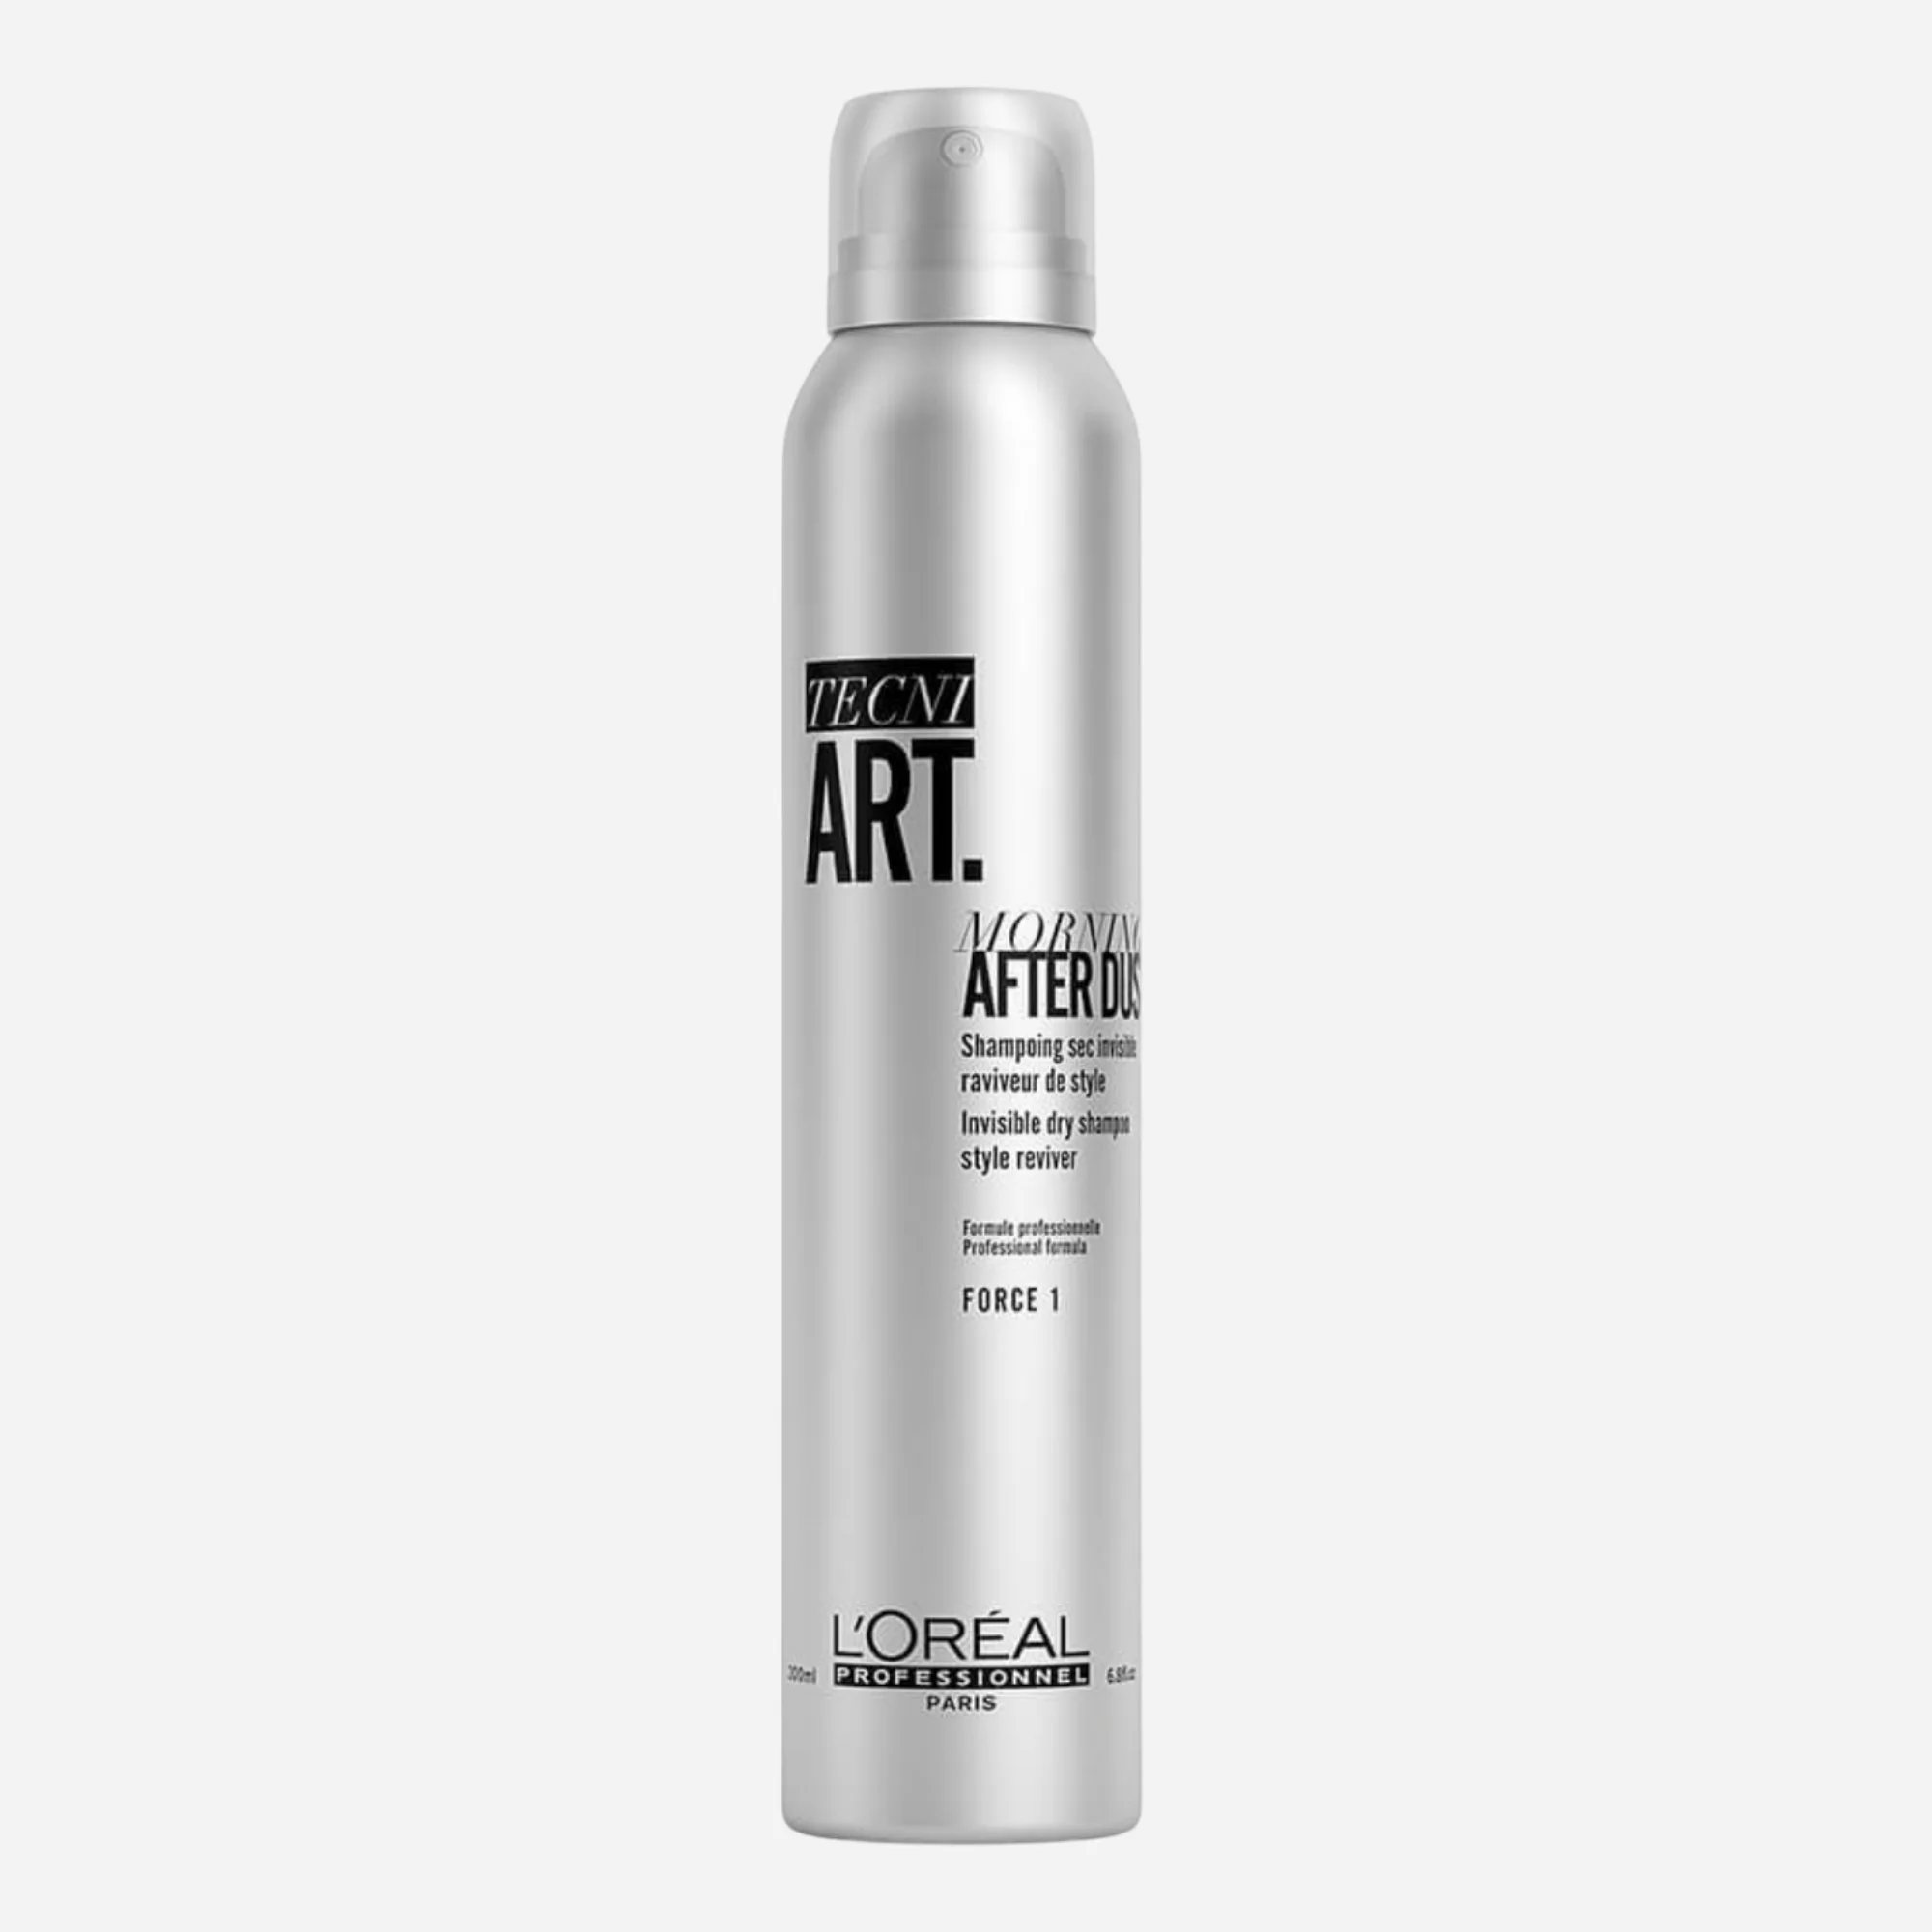 L’oreal Professionnel Tecni.art Morning After Dust